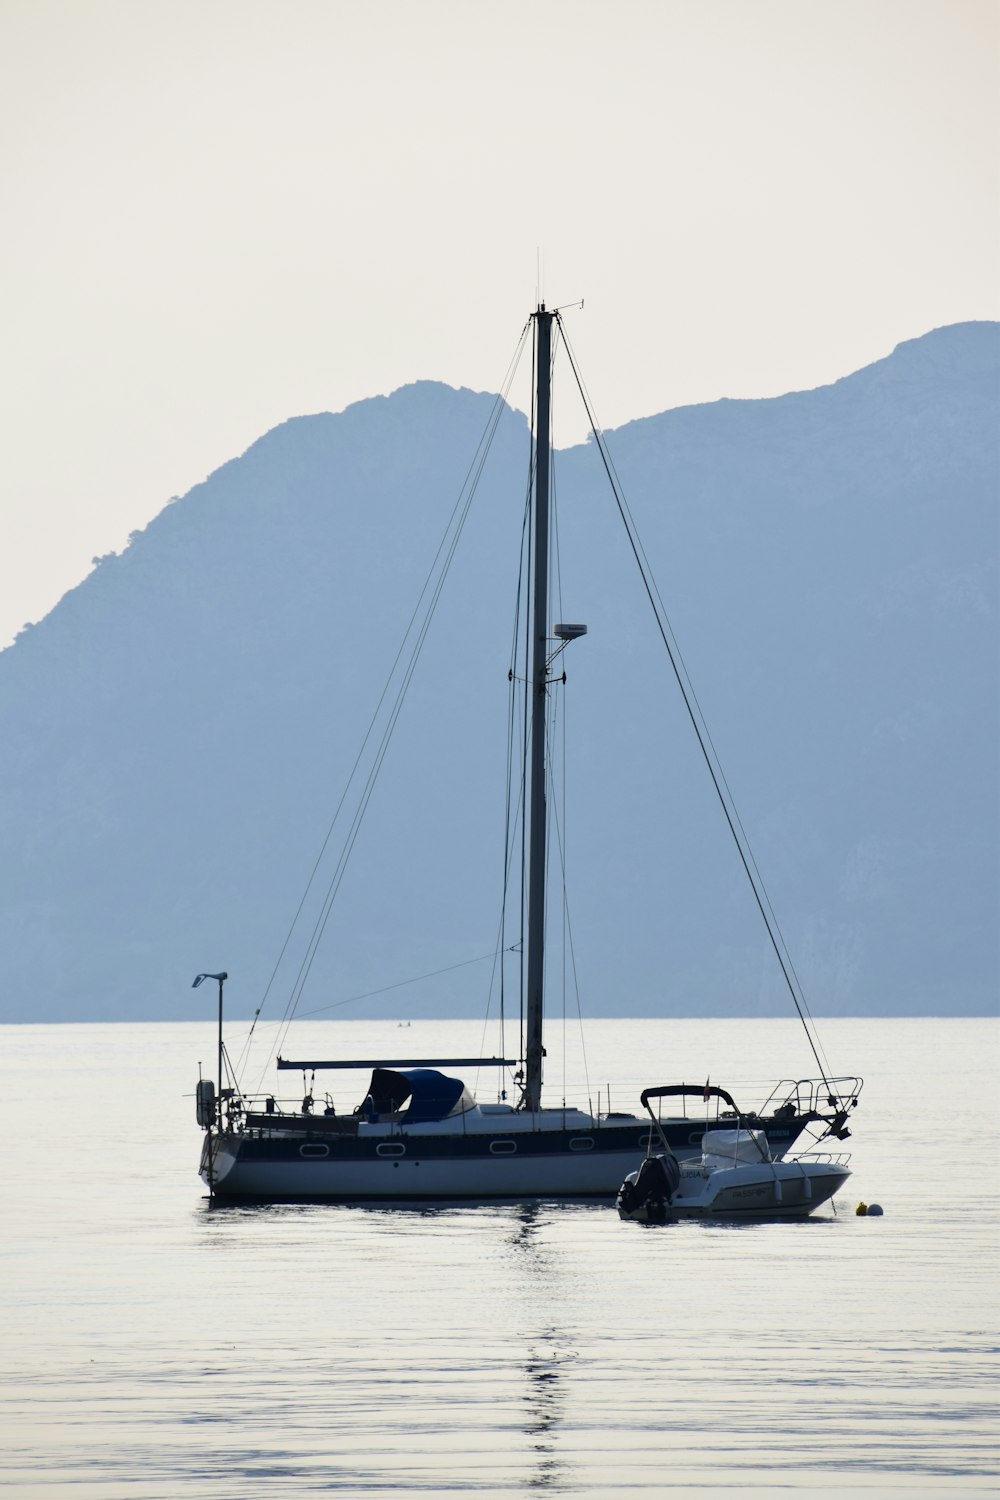 white and black sailboat on sea during daytime